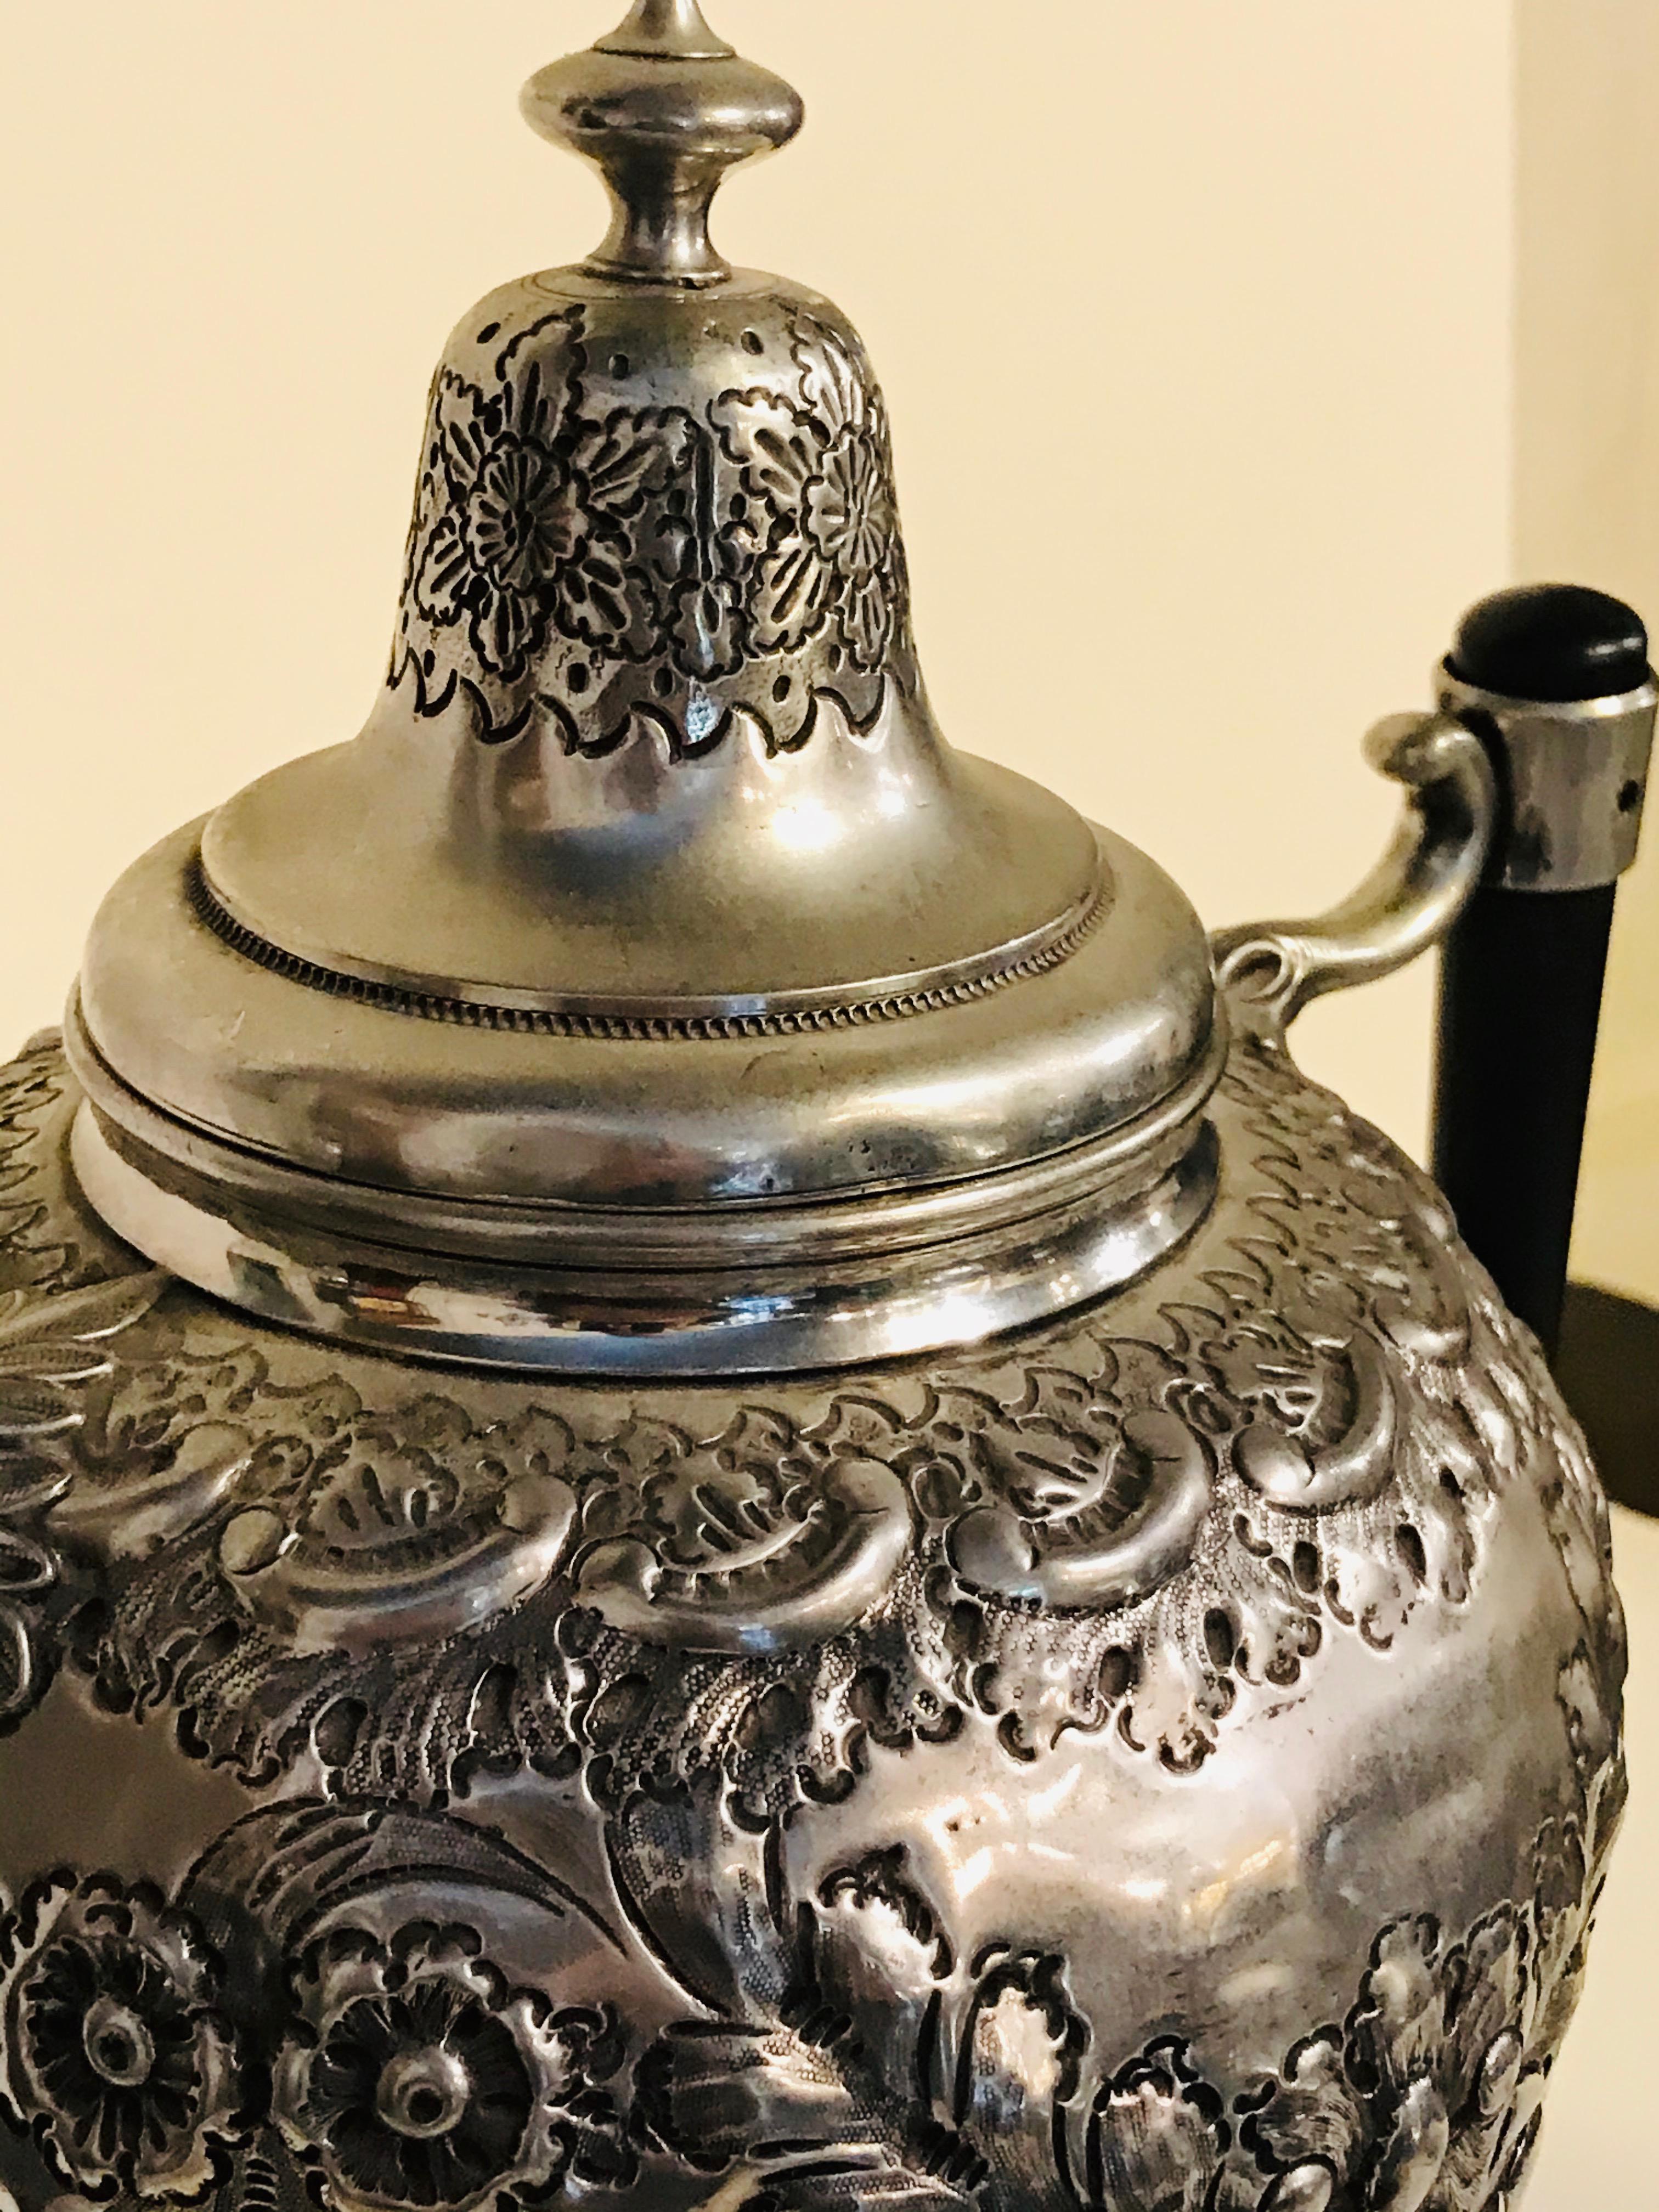 Decorative silver plate tea urn. Sit this on your sideboard for charm.